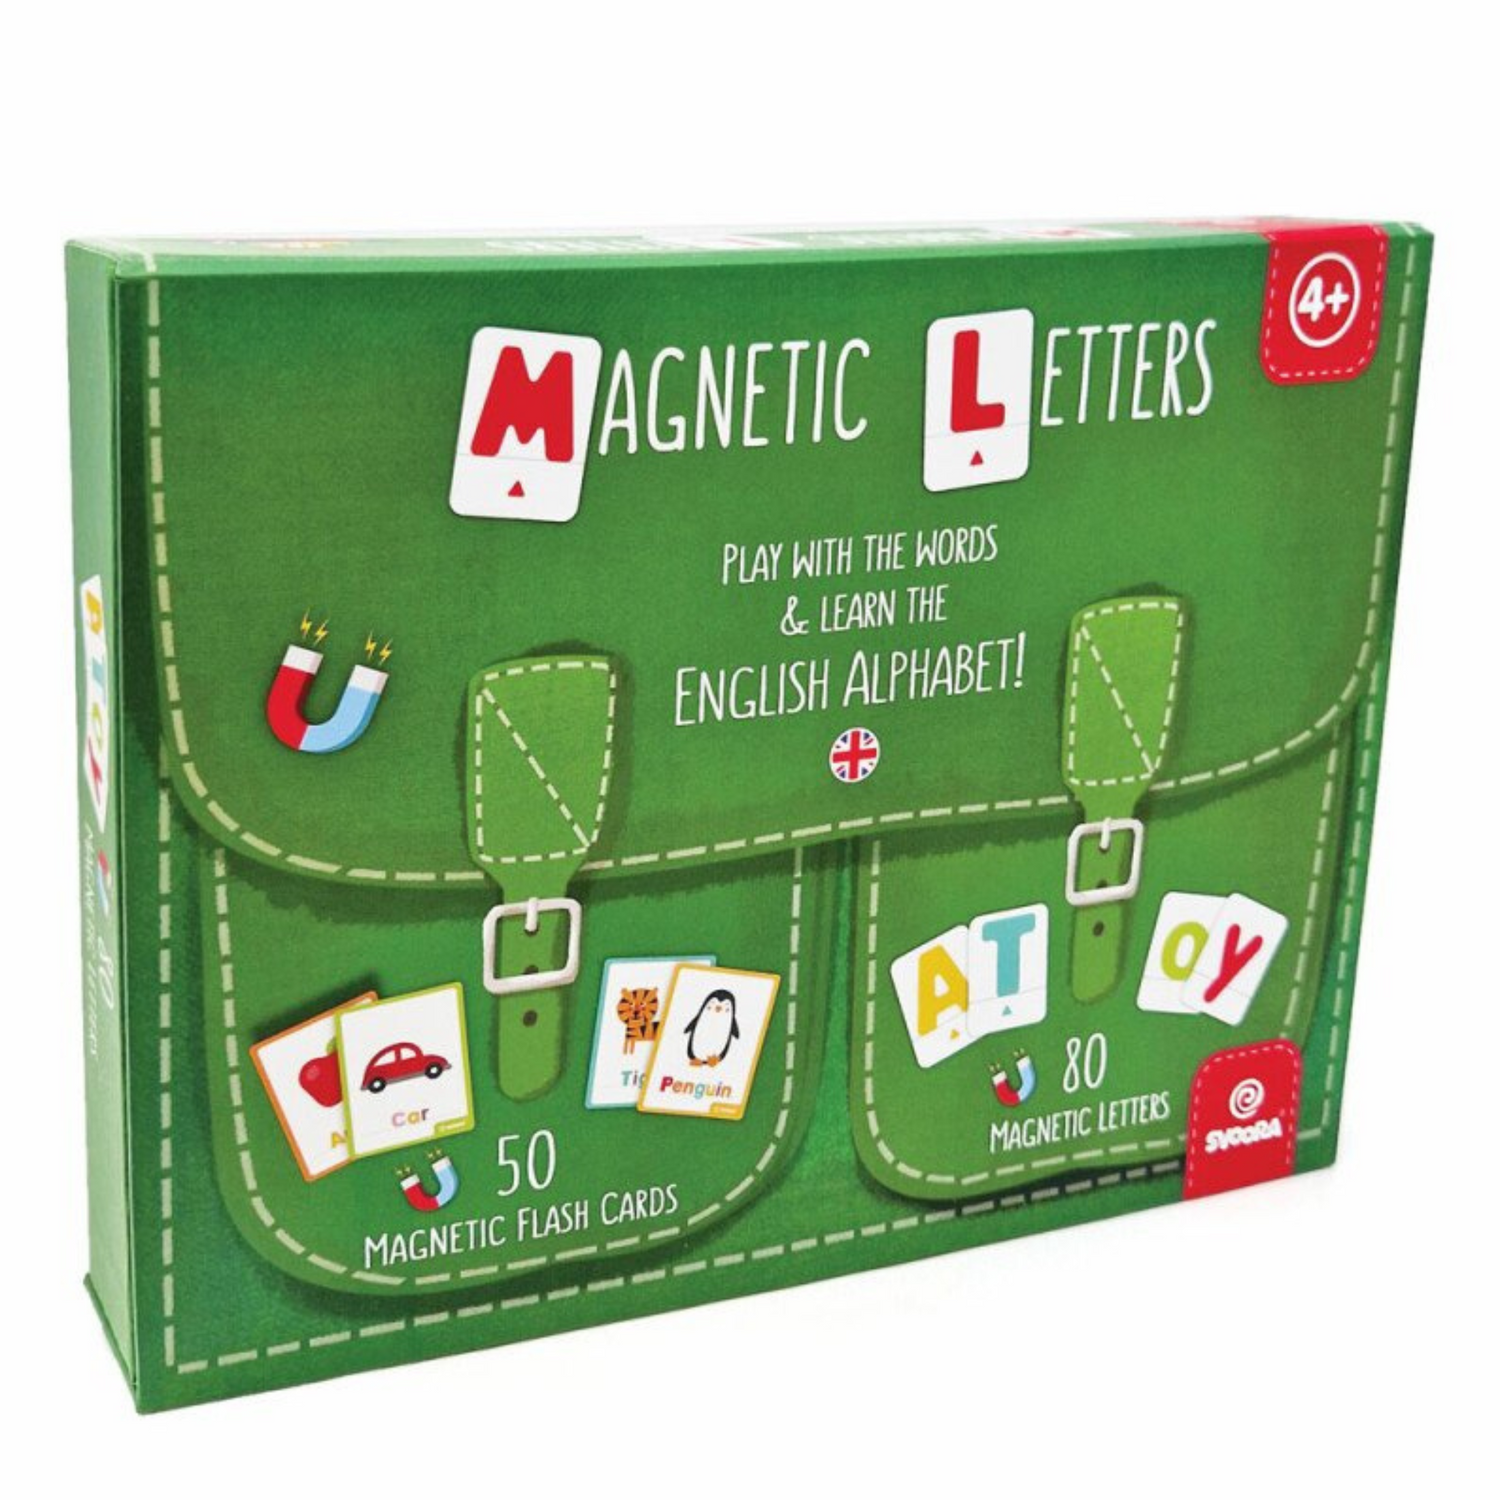 Educational magnetic game - Learn the English alphabet 